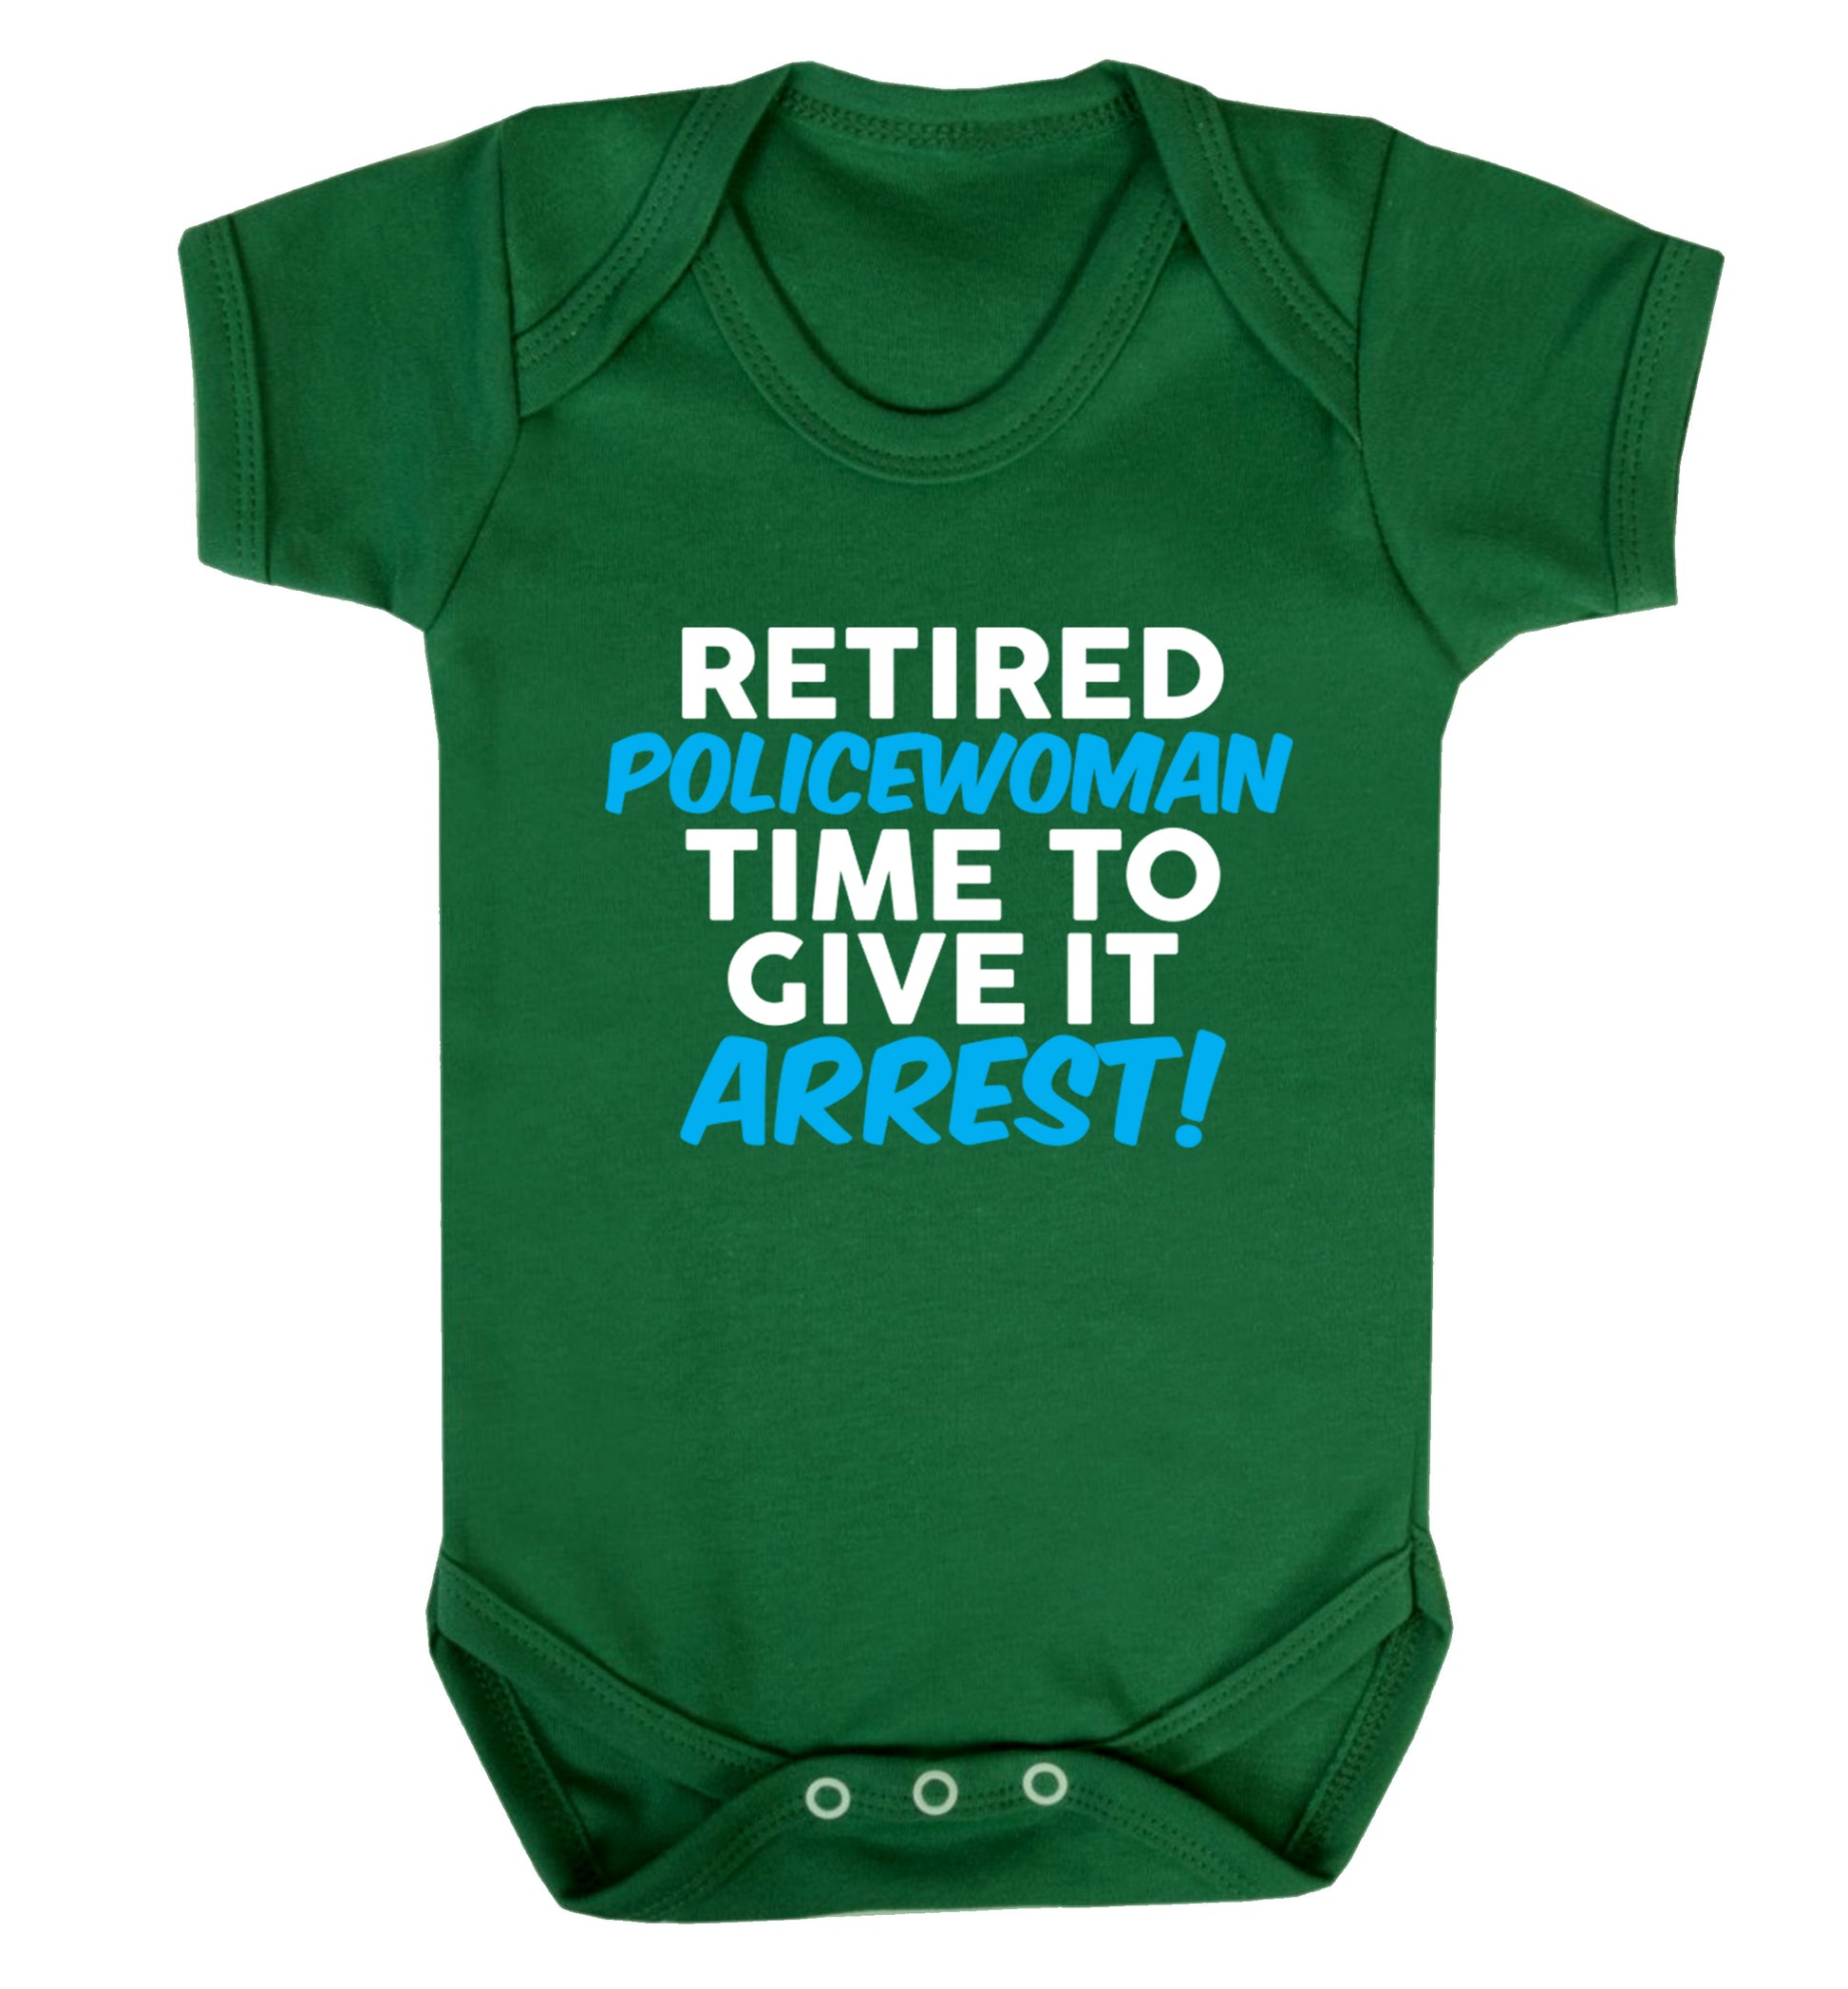 Retired policewoman time to give it arrest Baby Vest green 18-24 months